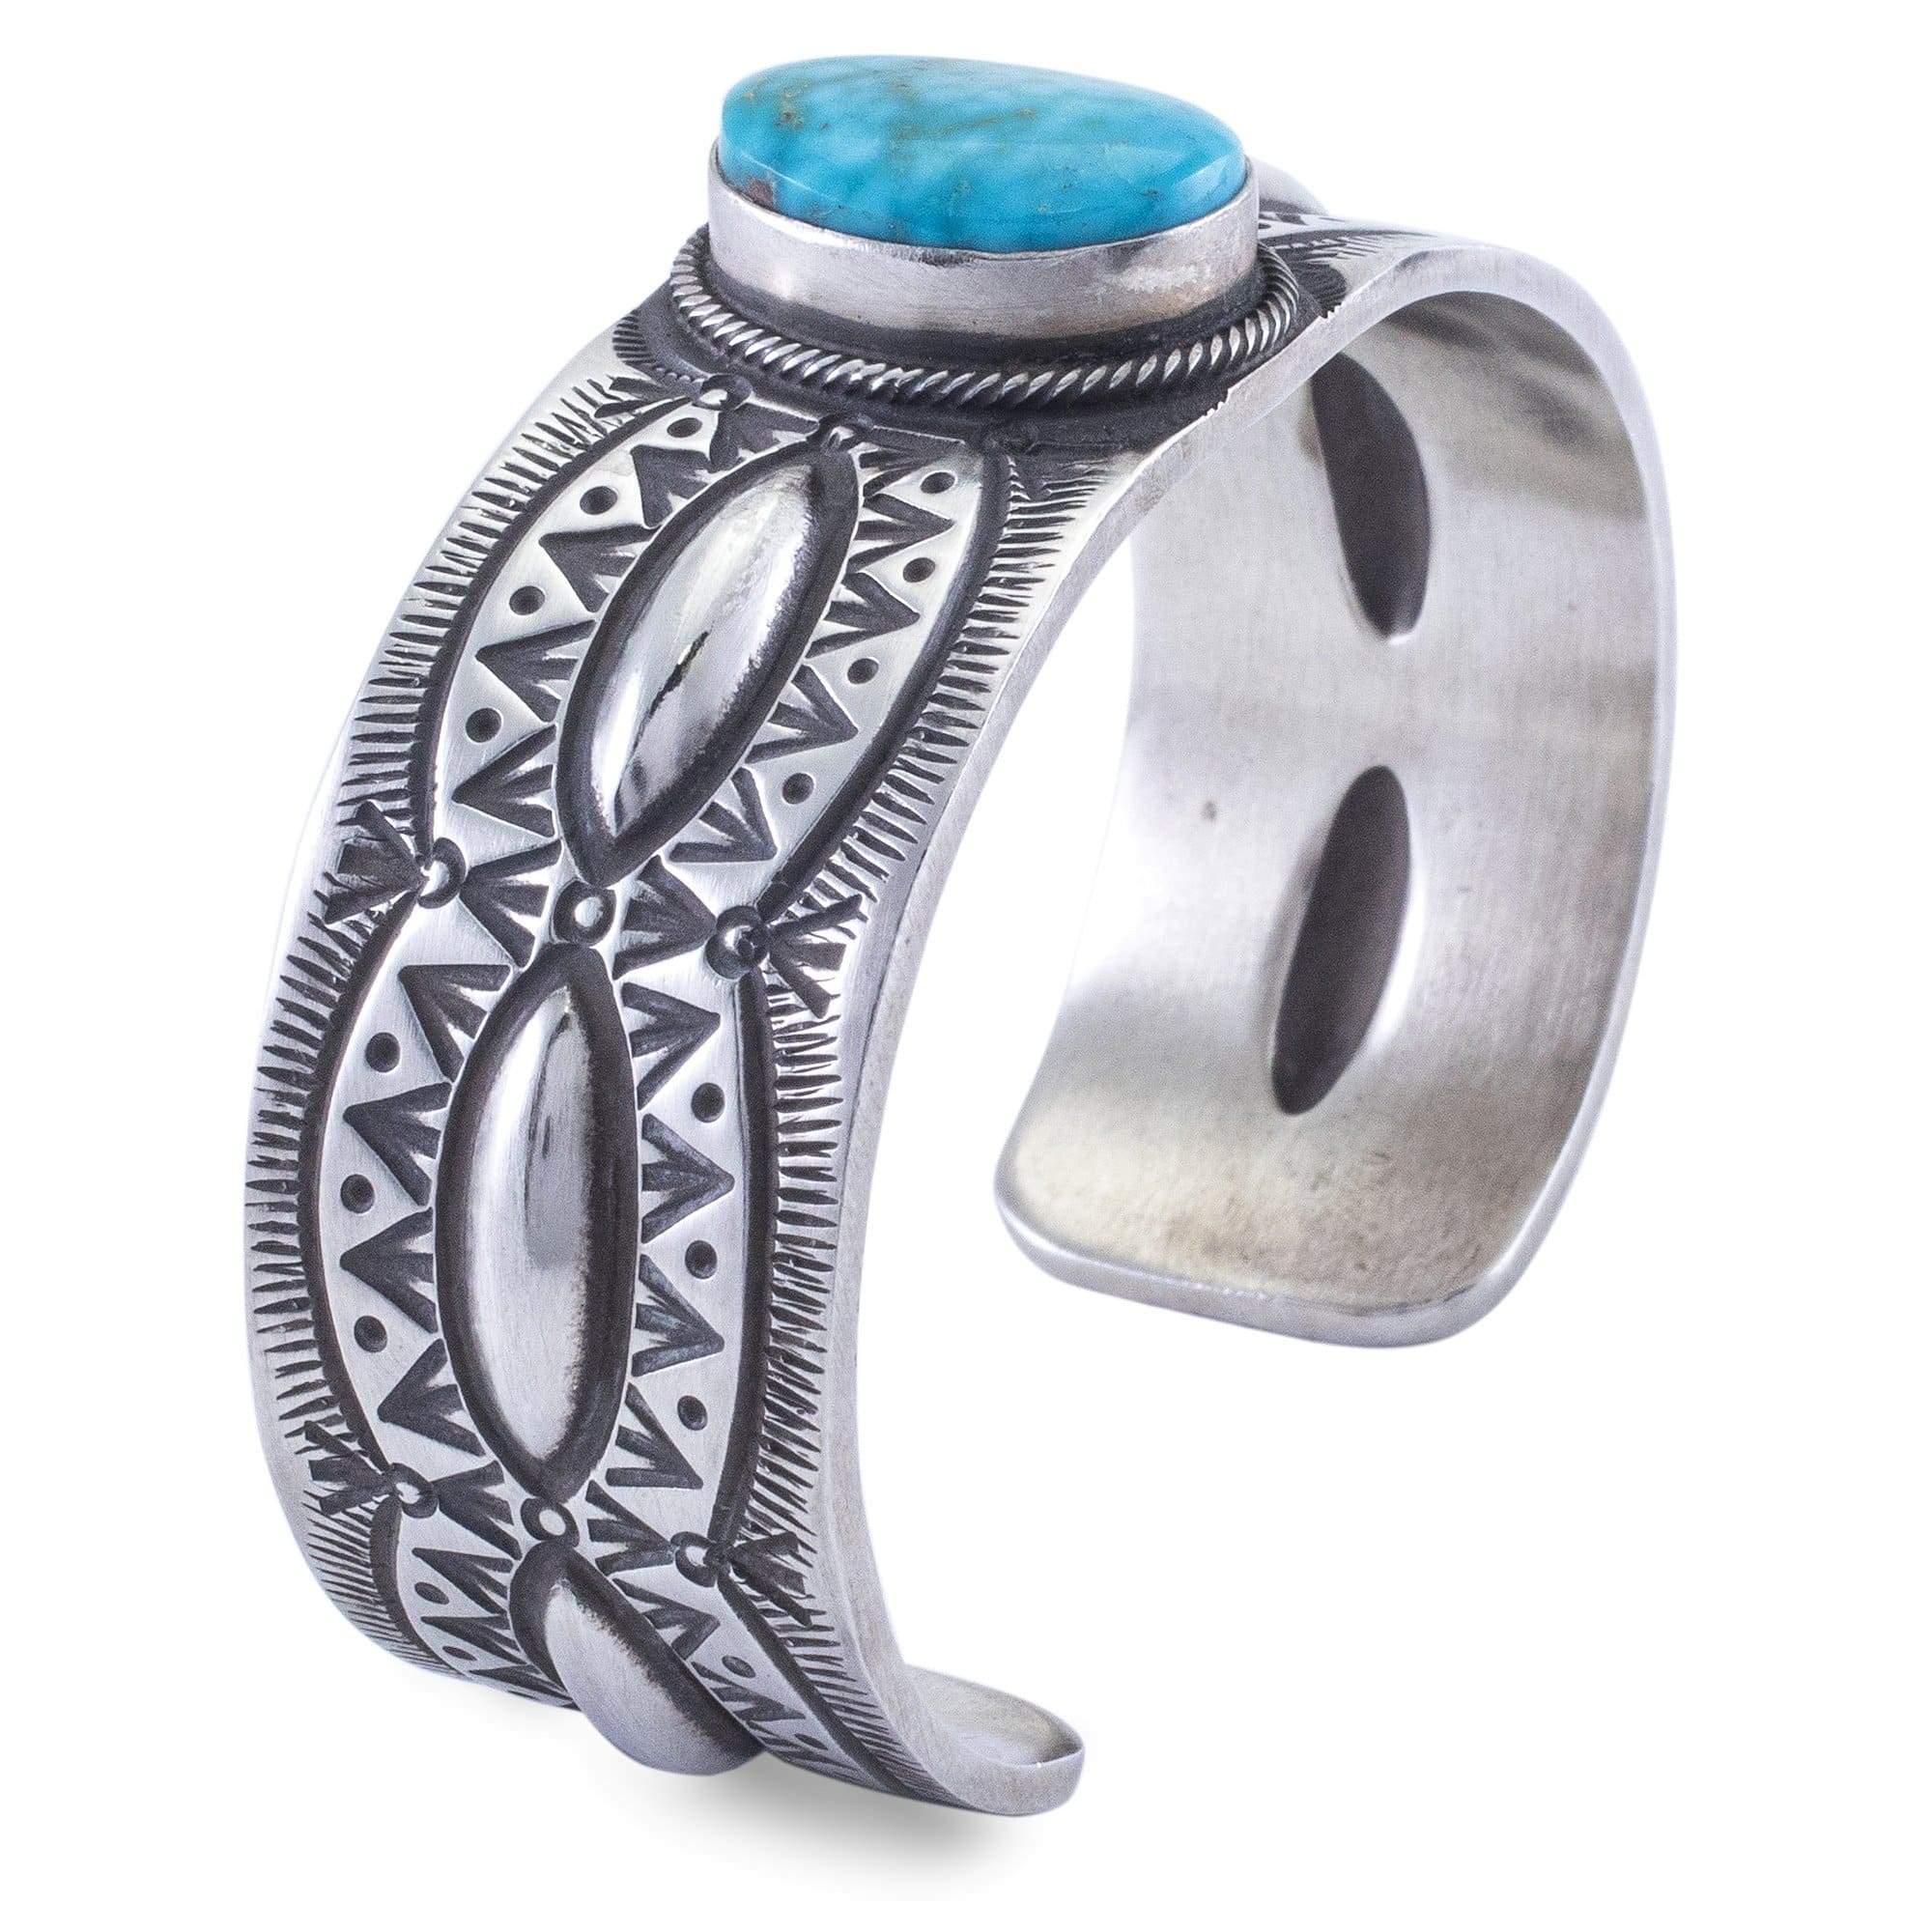 Kalifano Native American Jewelry H.S. Kingman Turquoise USA Native American Made 925 Sterling Silver Cuff NAB1300.003